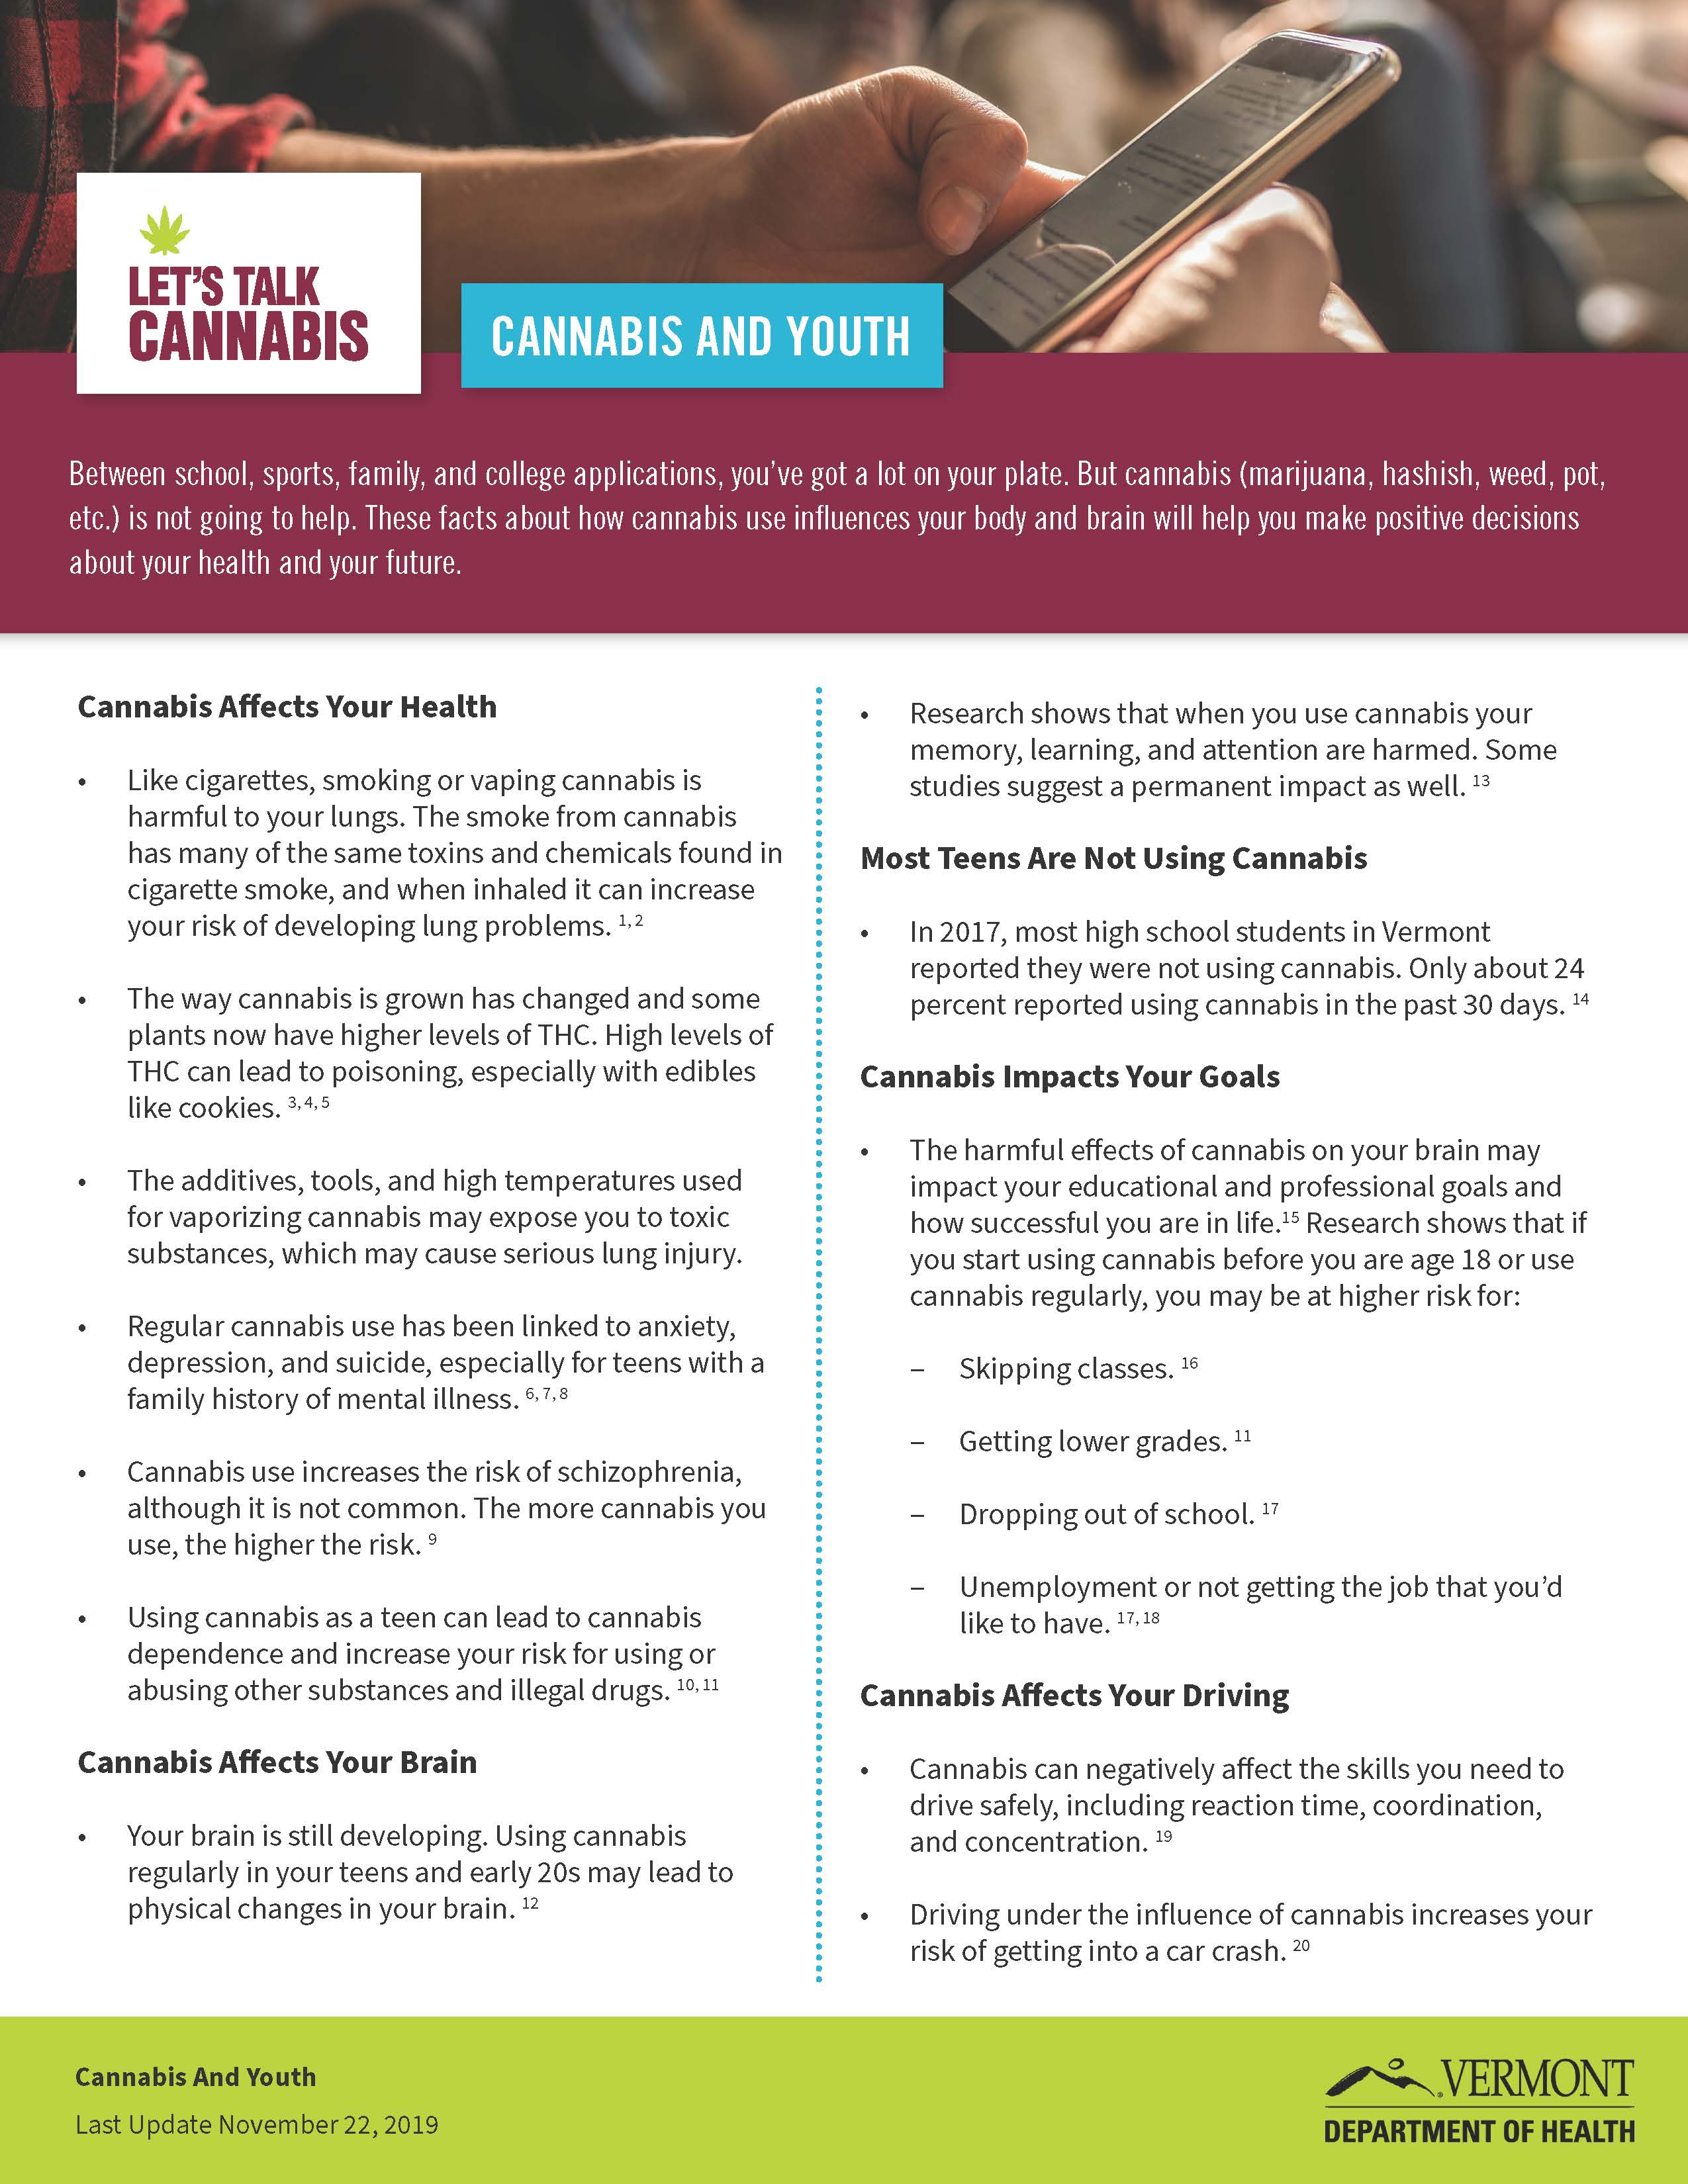 Let's Talk Cannabis youth fact sheet